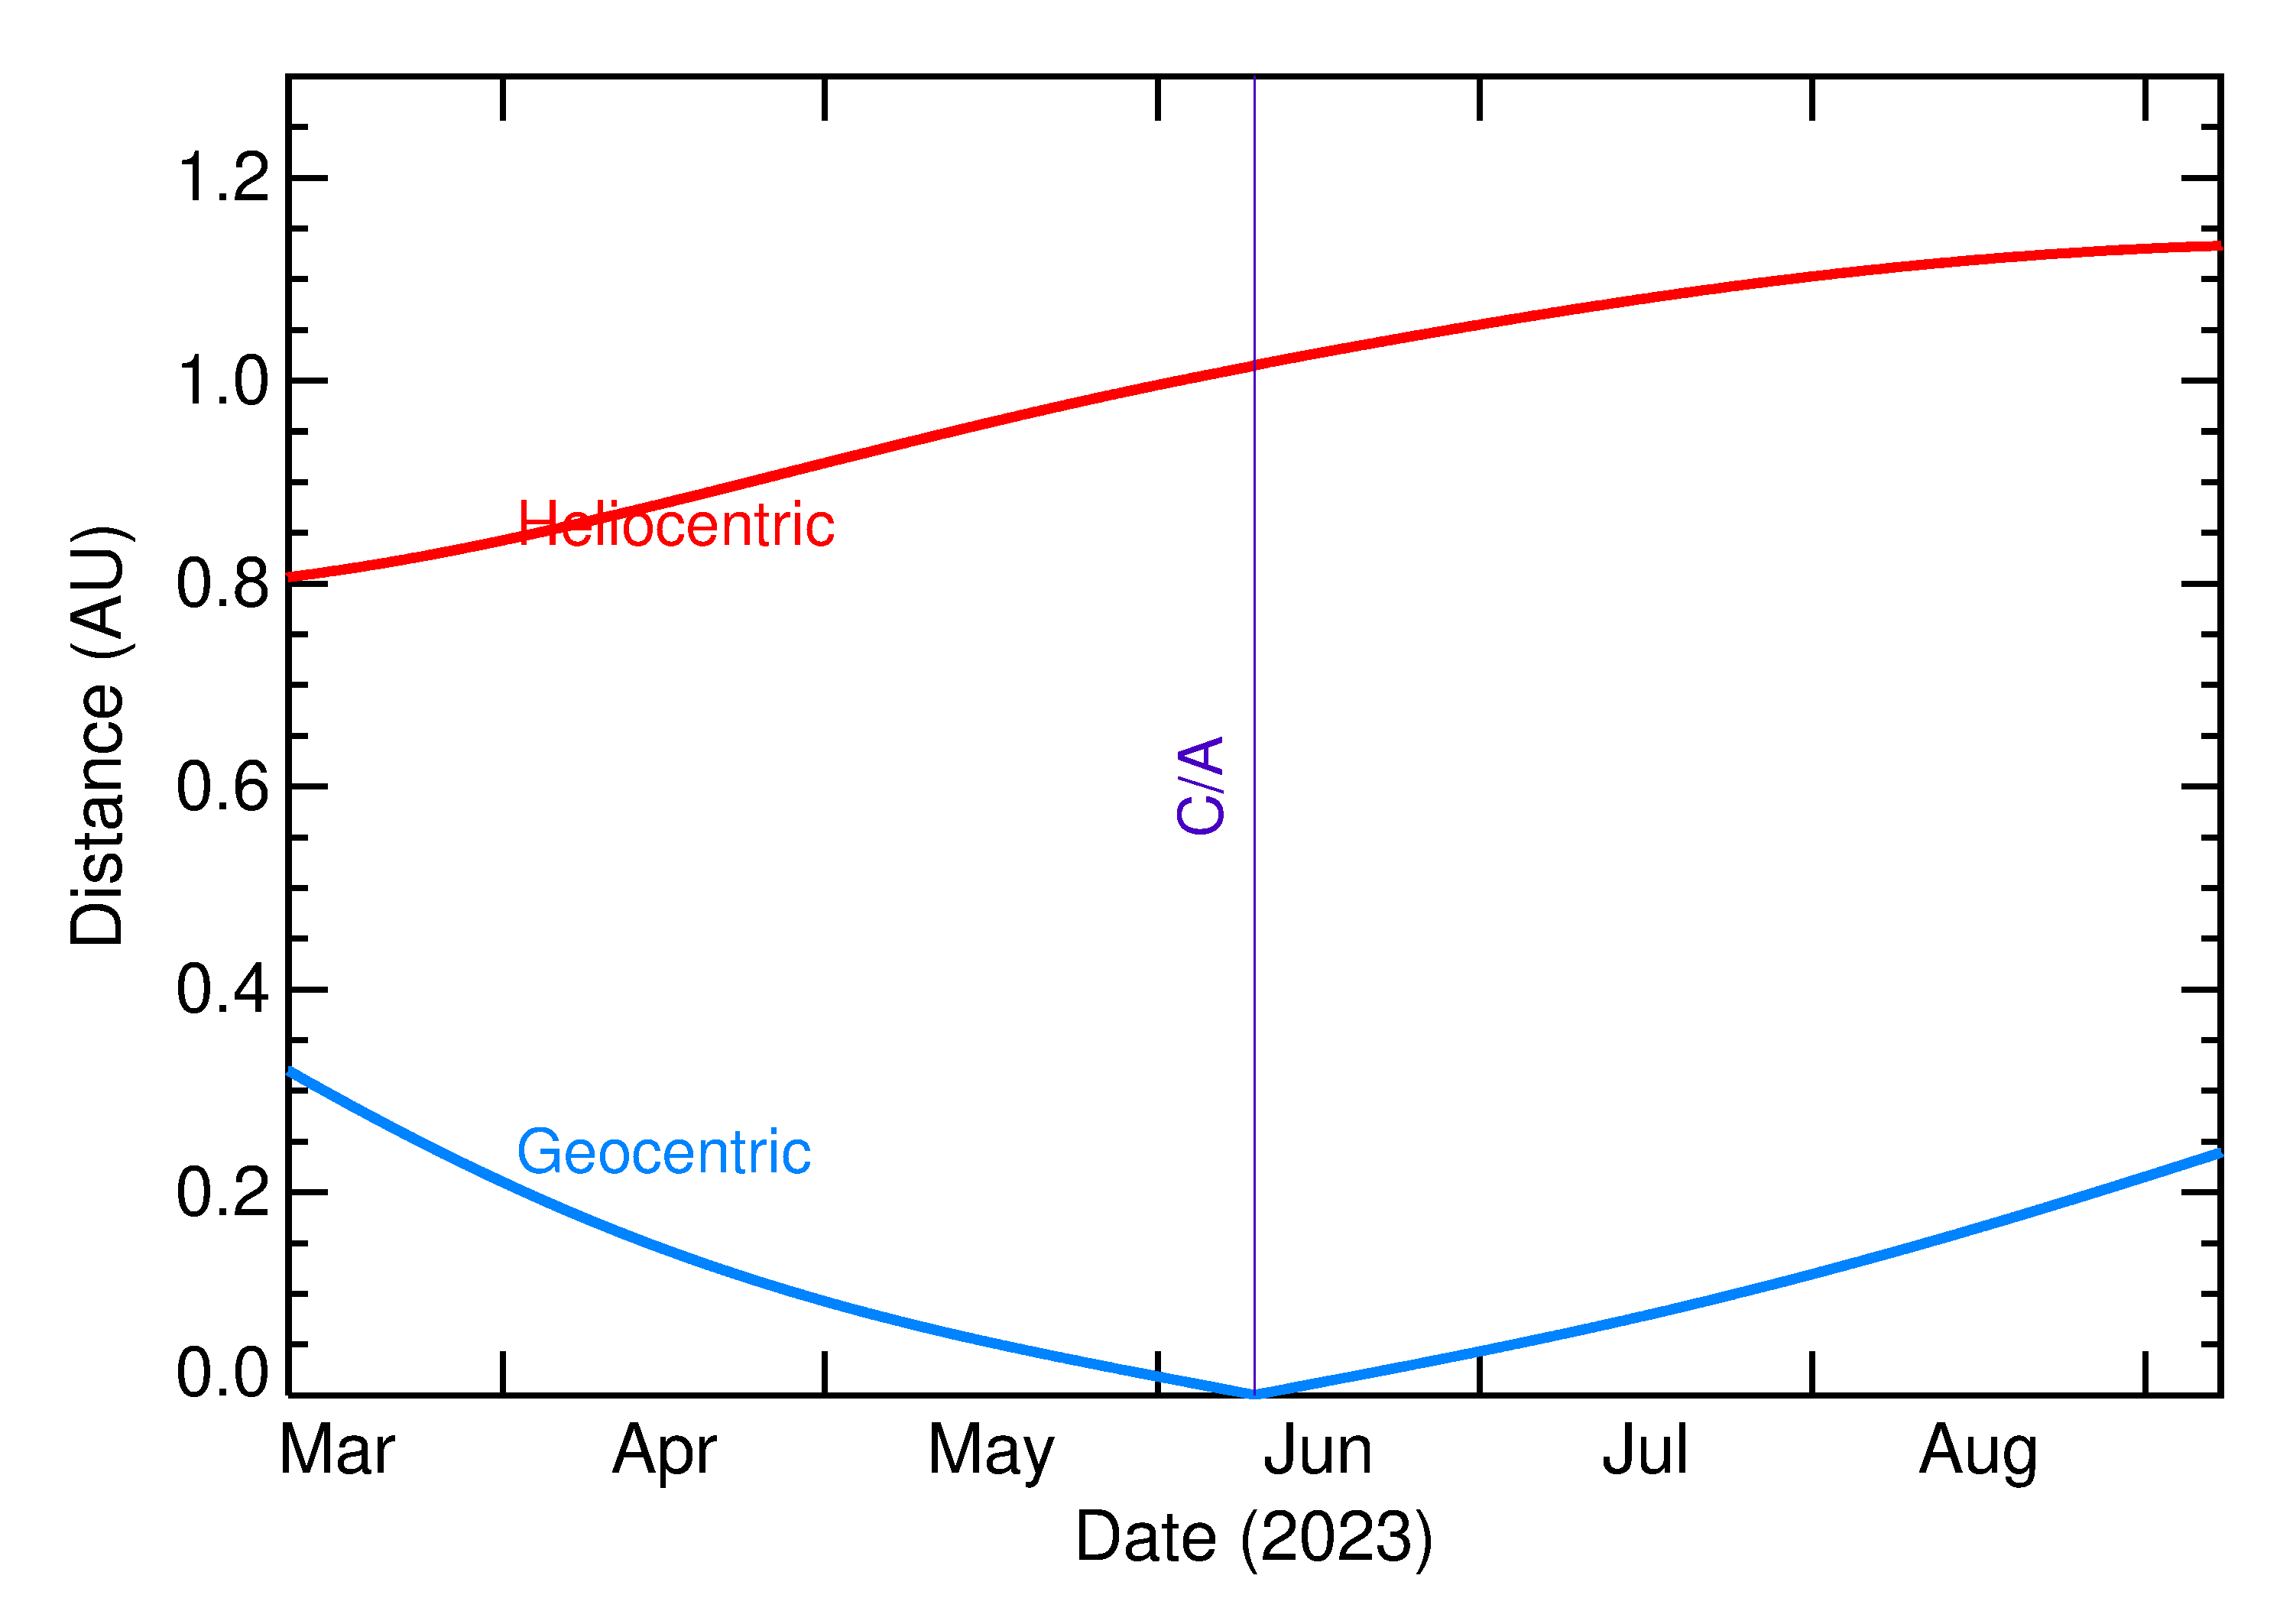 Heliocentric and Geocentric Distances of 2023 LS in the months around closest approach